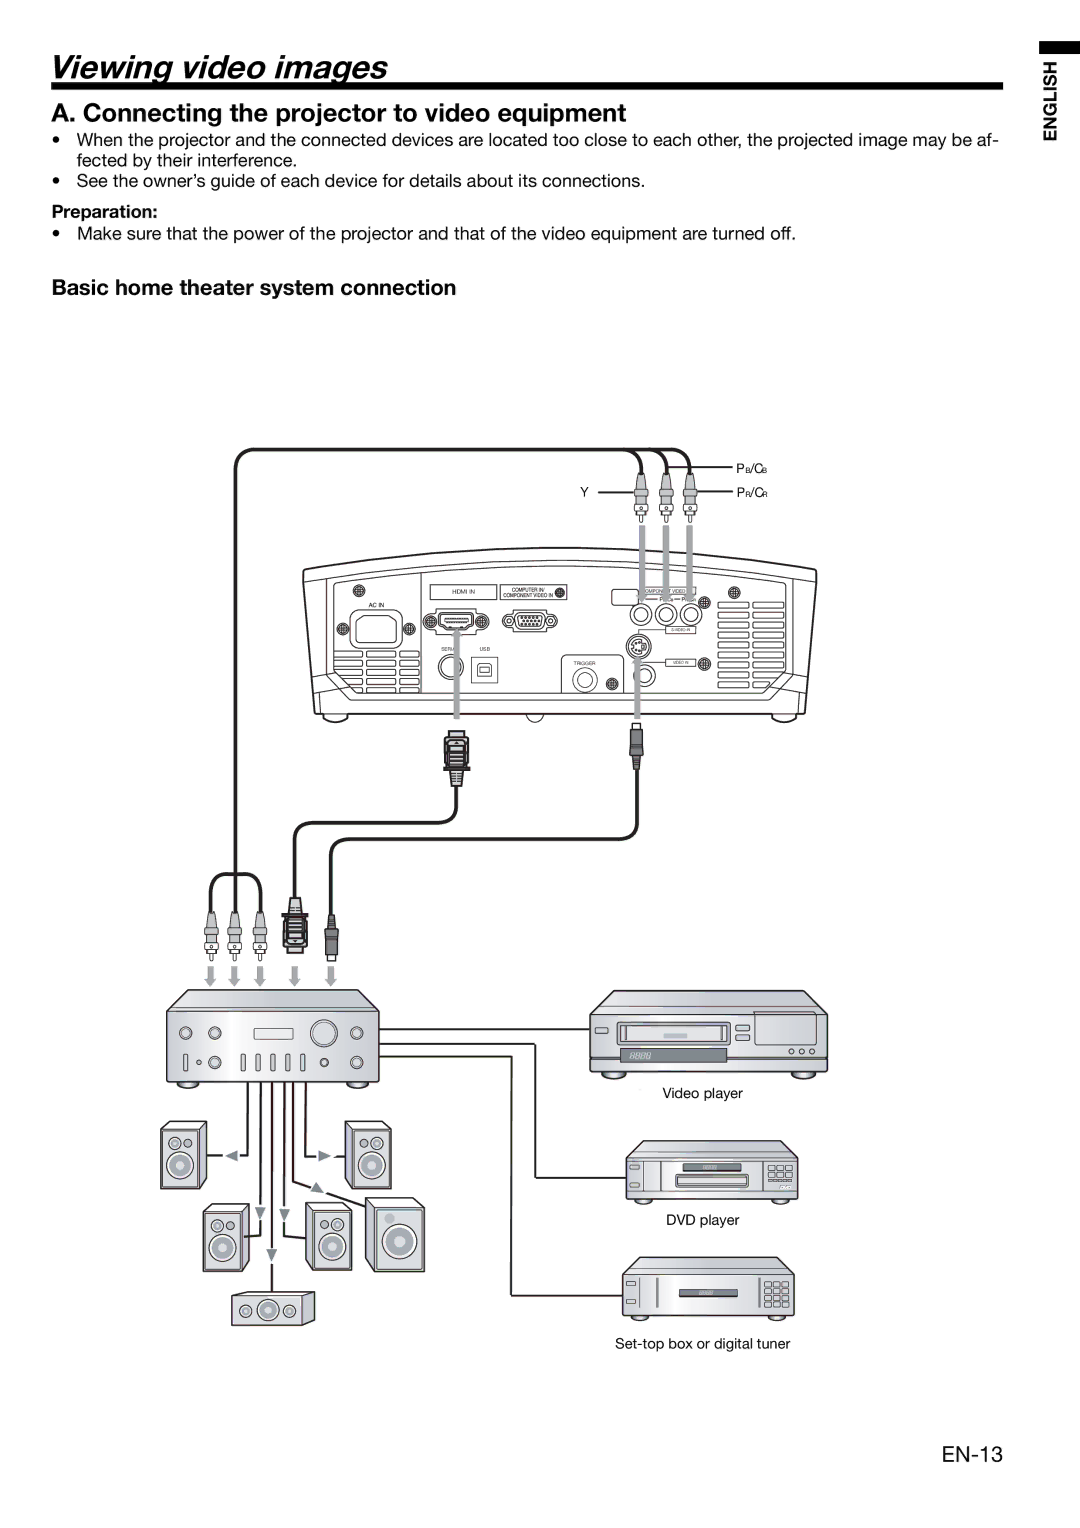 Mitsubishi Electronics HD1000 user manual Viewing video images, Connecting the projector to video equipment, Preparation 